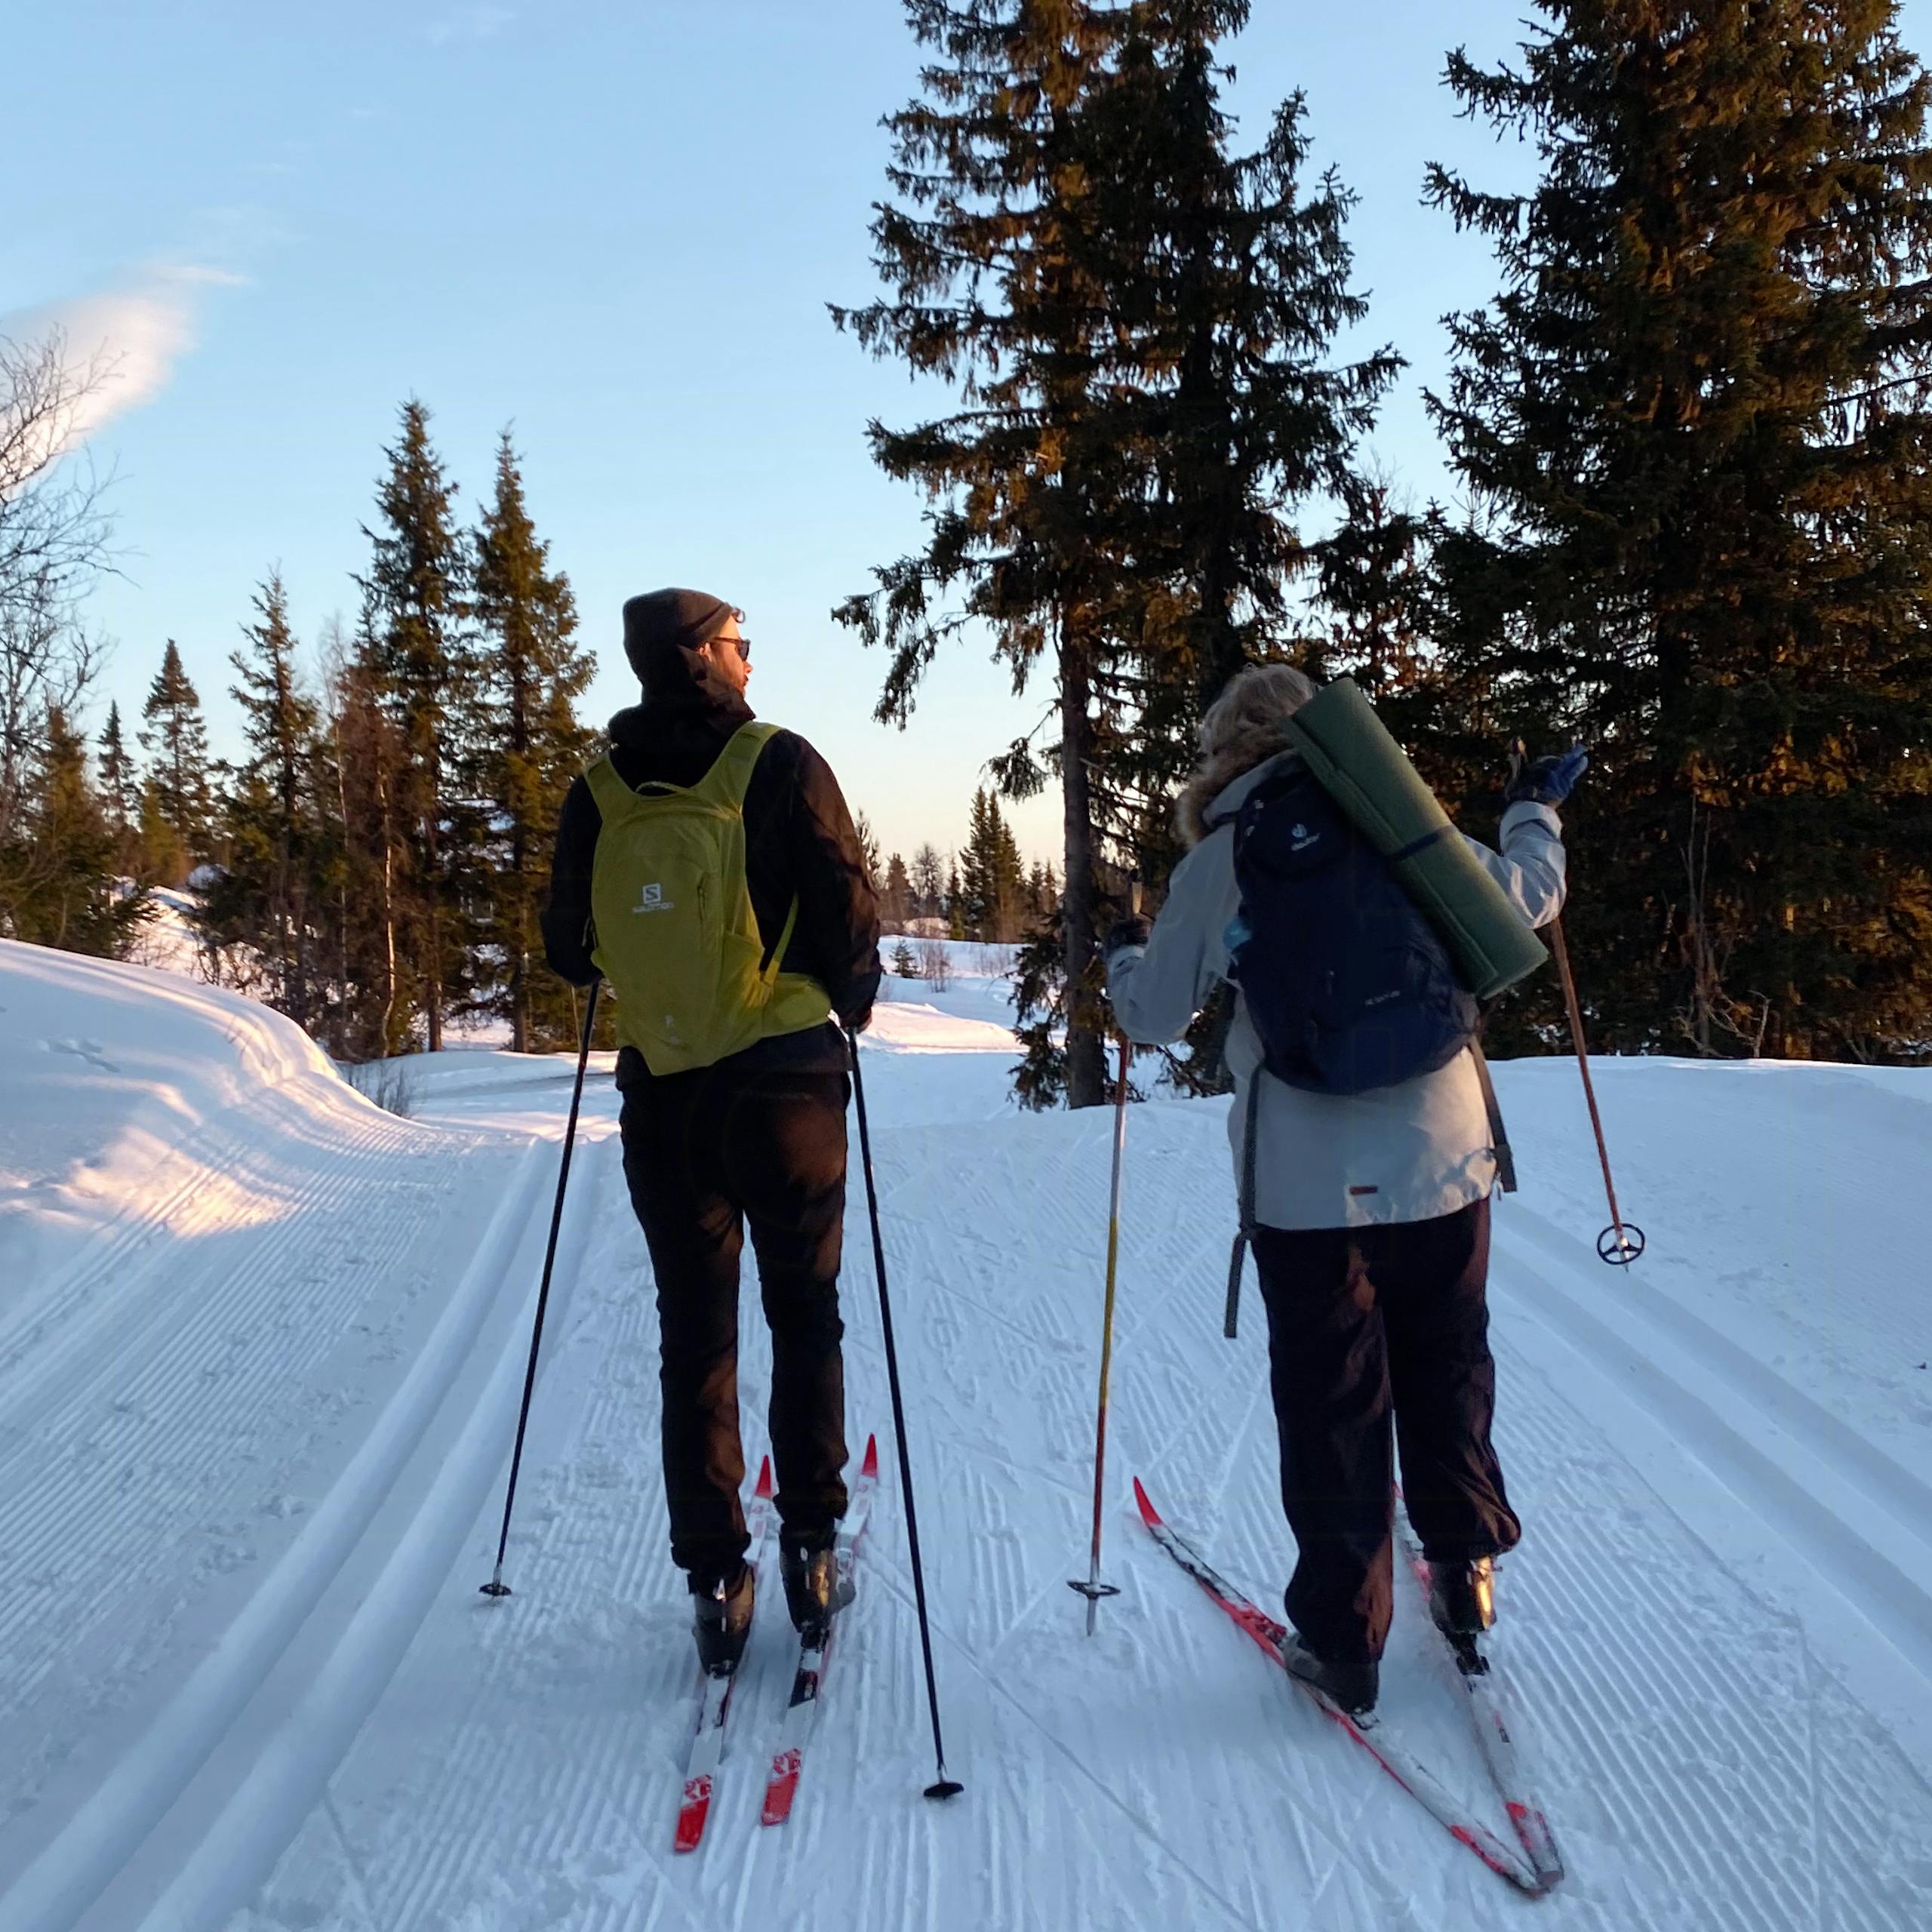 7 things you need to know before going on a ski holiday in Norway